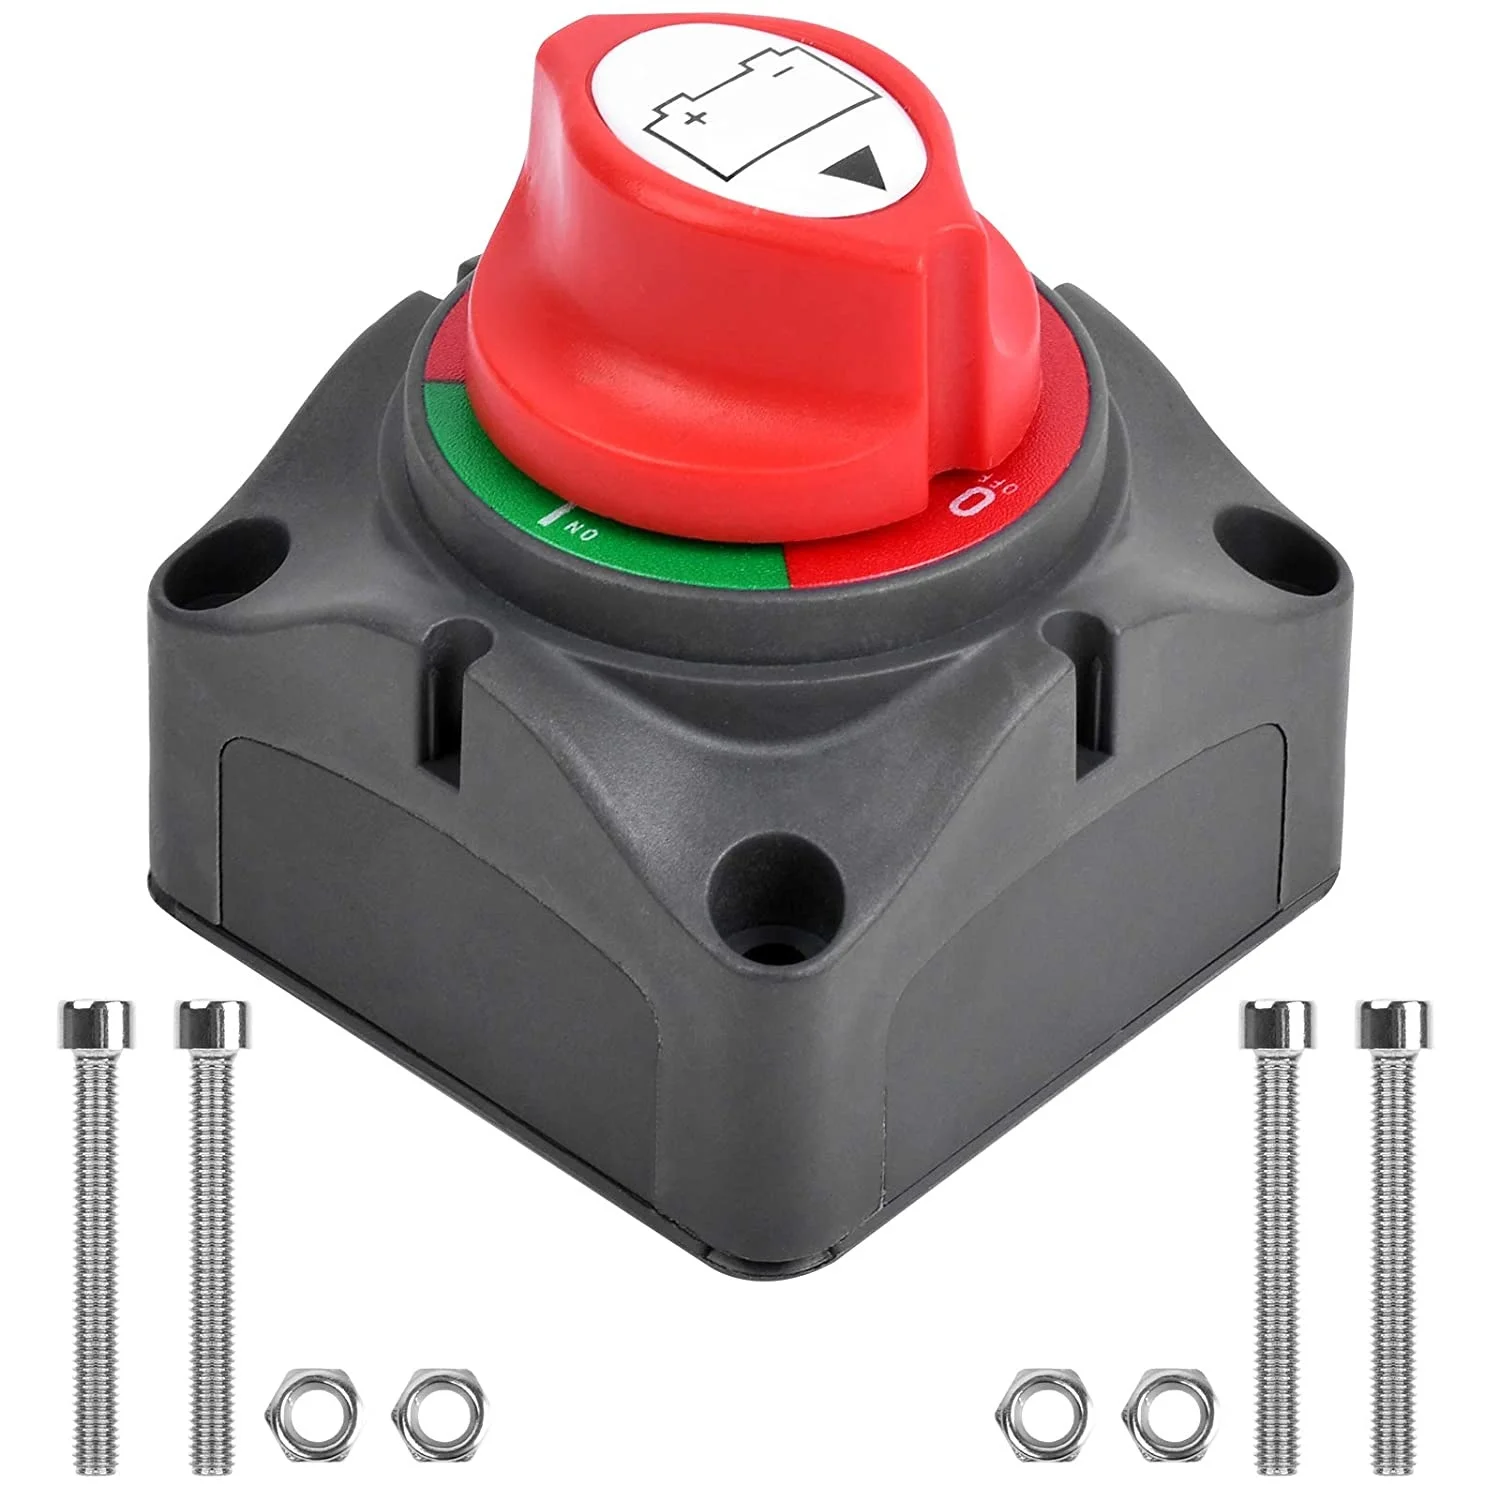 Slocable Battery Disconnect Switch 12-48v 1-2-Both-Off Waterproof Heavy Double Battery Master Cut Shut Off Isolator Switch for Car Vehicle RV and Marine Boat 1-2-Both-Off 